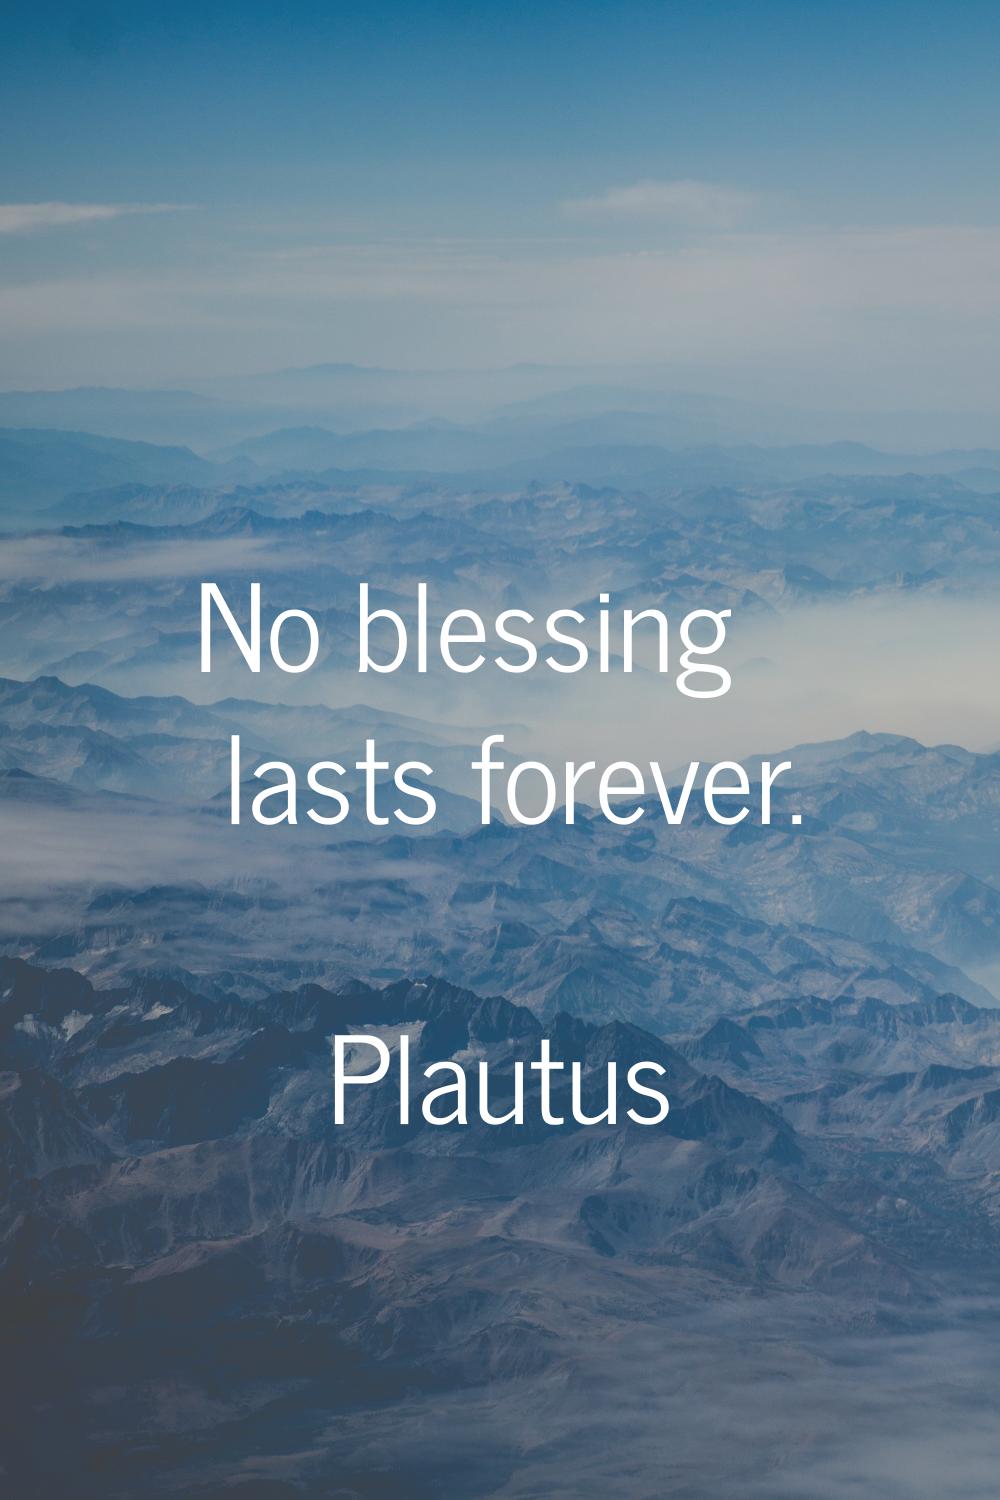 No blessing lasts forever.